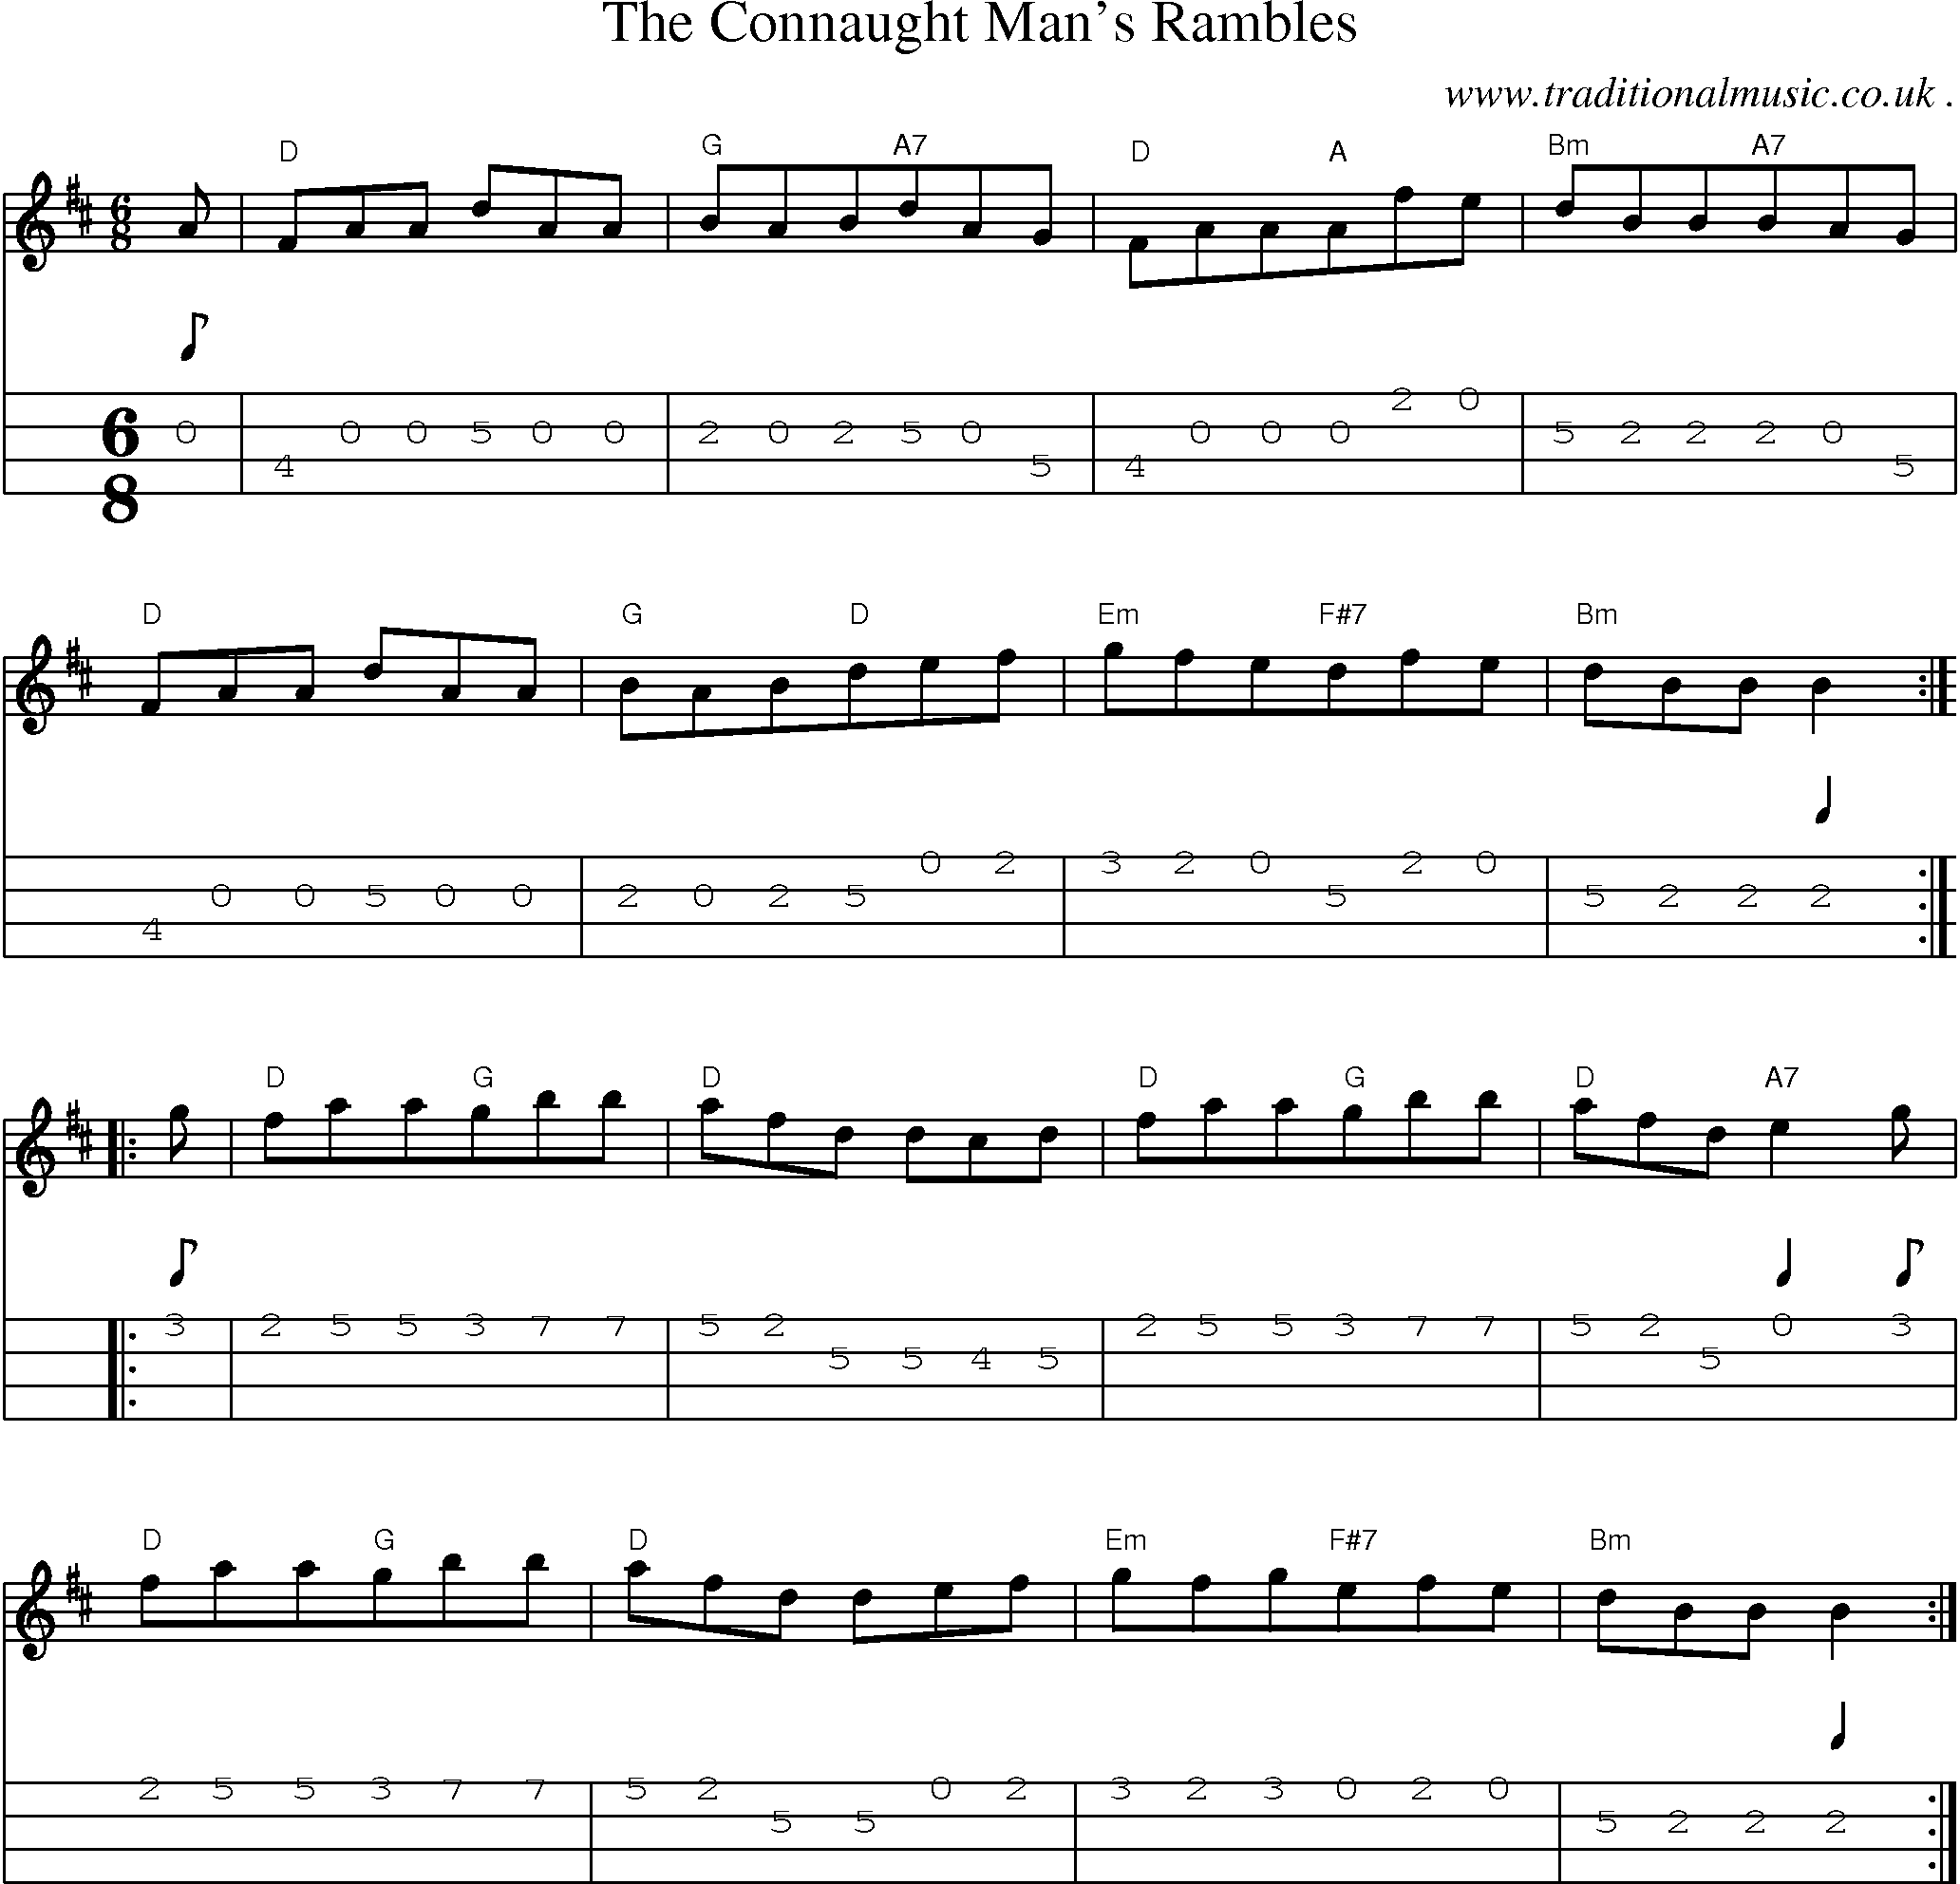 Sheet-Music and Mandolin Tabs for The Connaught Mans Rambles